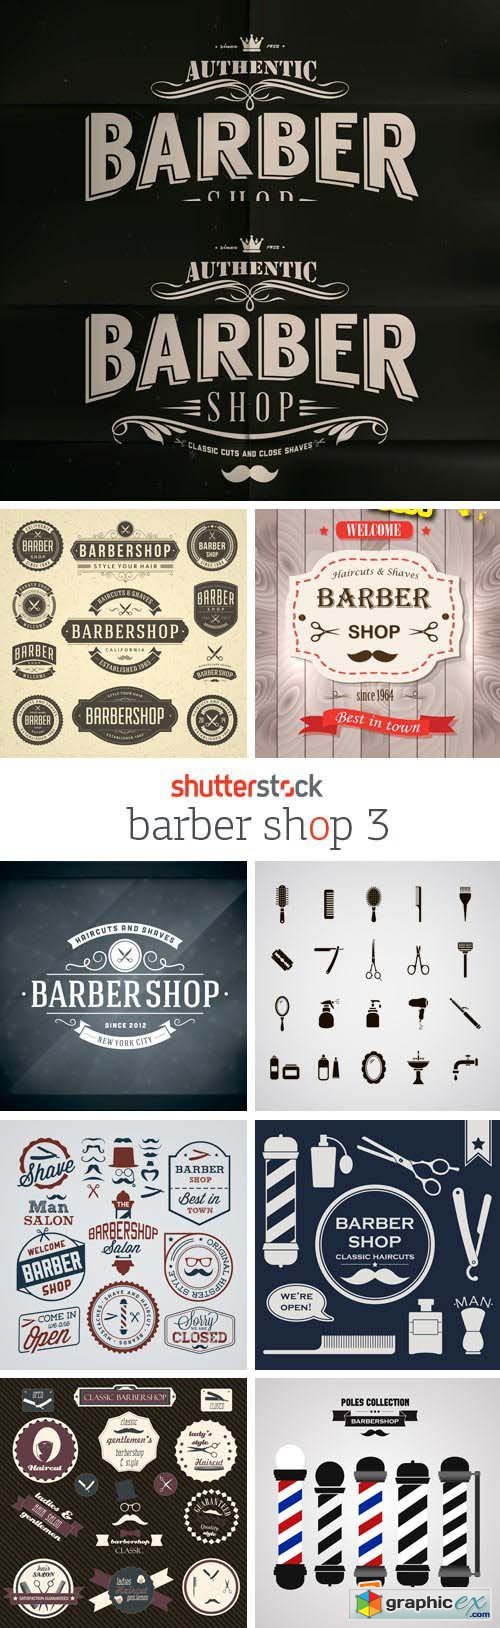 Amazing SS - Barber Shop 3, 25xEPS